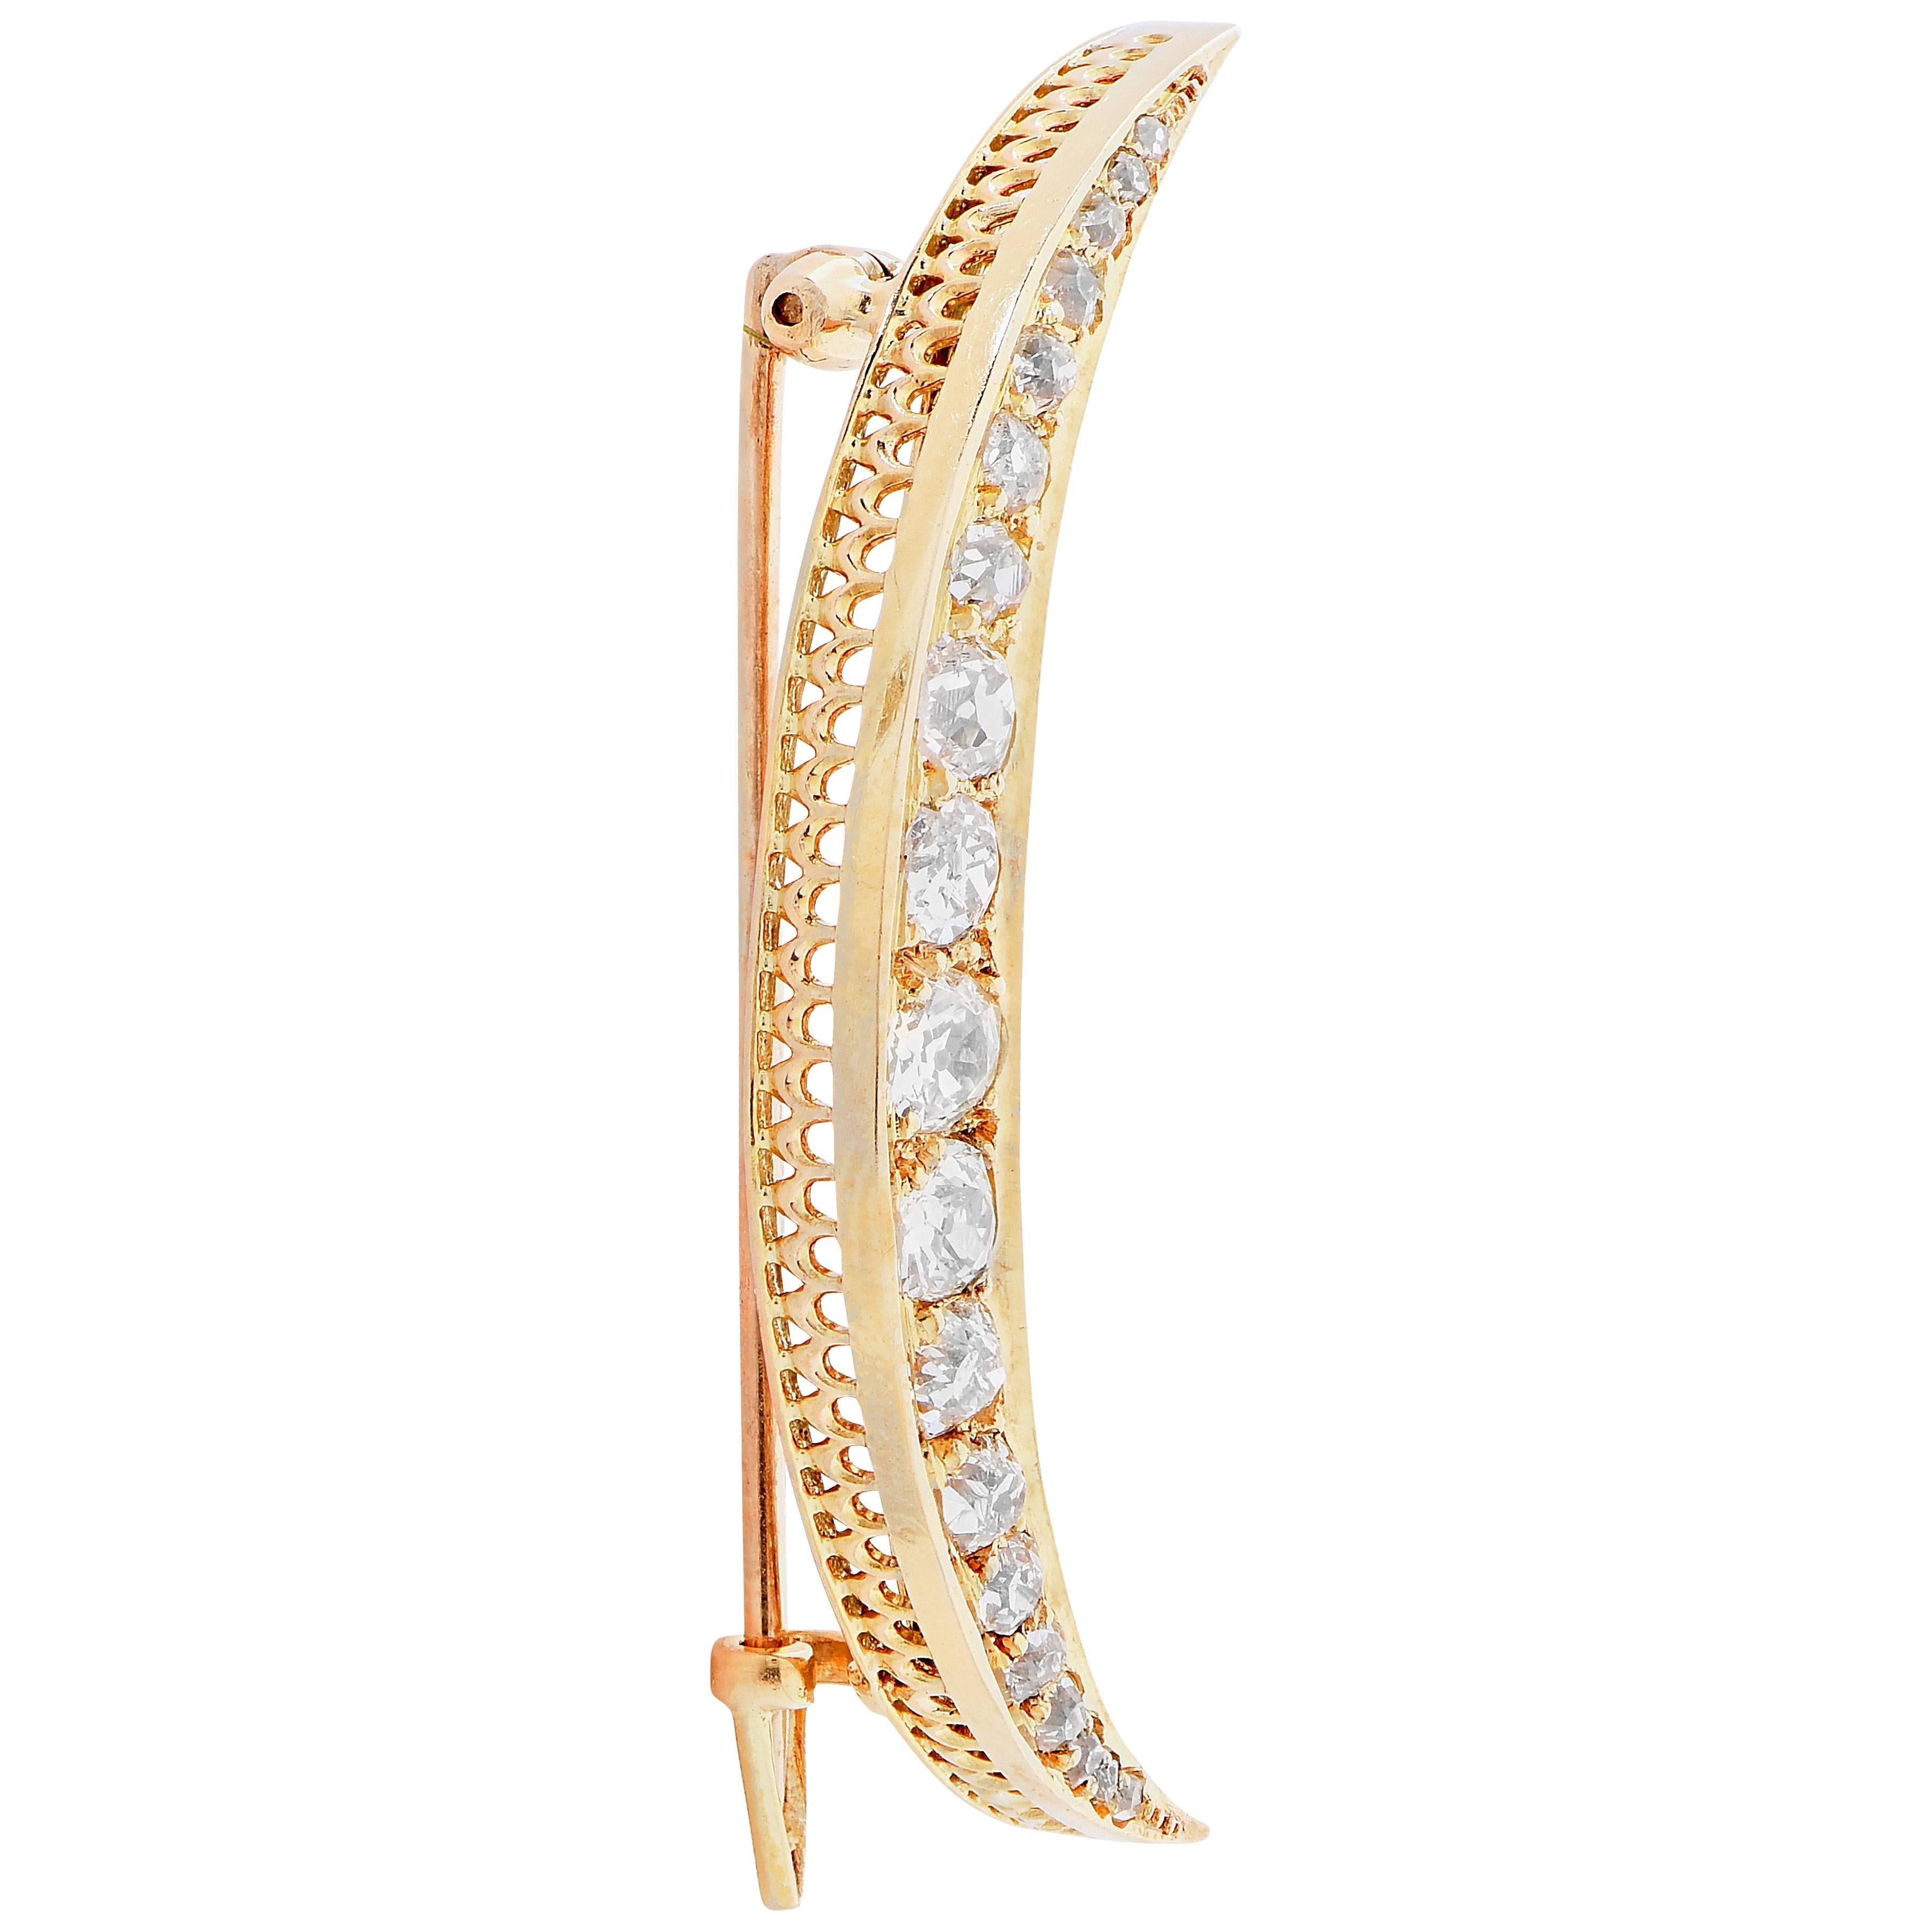 Antique Half moon brooch featuring 19 old mine cut diamonds with an estimated total weight of 1.25 carats set in 18 karat yellow gold.

Metal Type: 18 Kt Yellow Gold
Metal Weight: 5.3 Grams